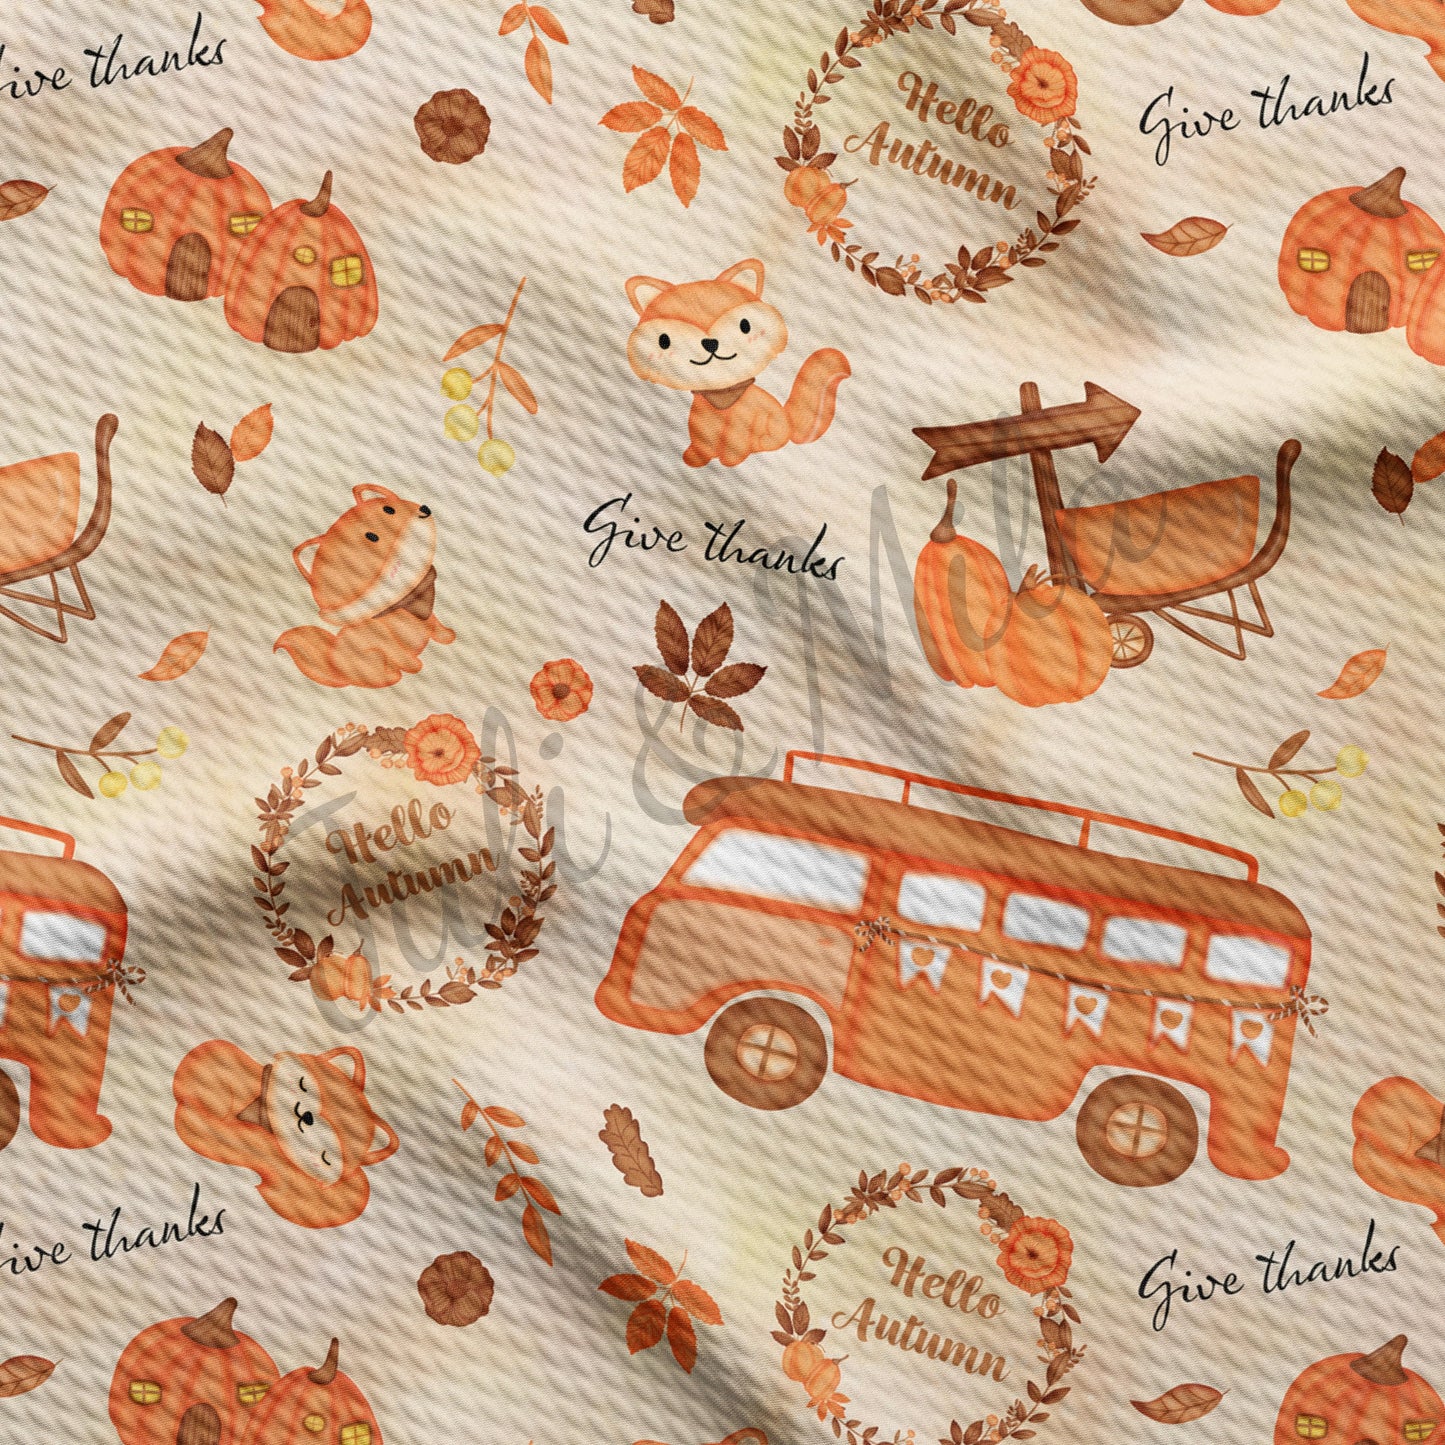 Printed Liverpool Bullet Textured Fabric by the yard 4Way Stretch Solid Strip Thick Knit Jersey Liverpool Fabric pumpkin116